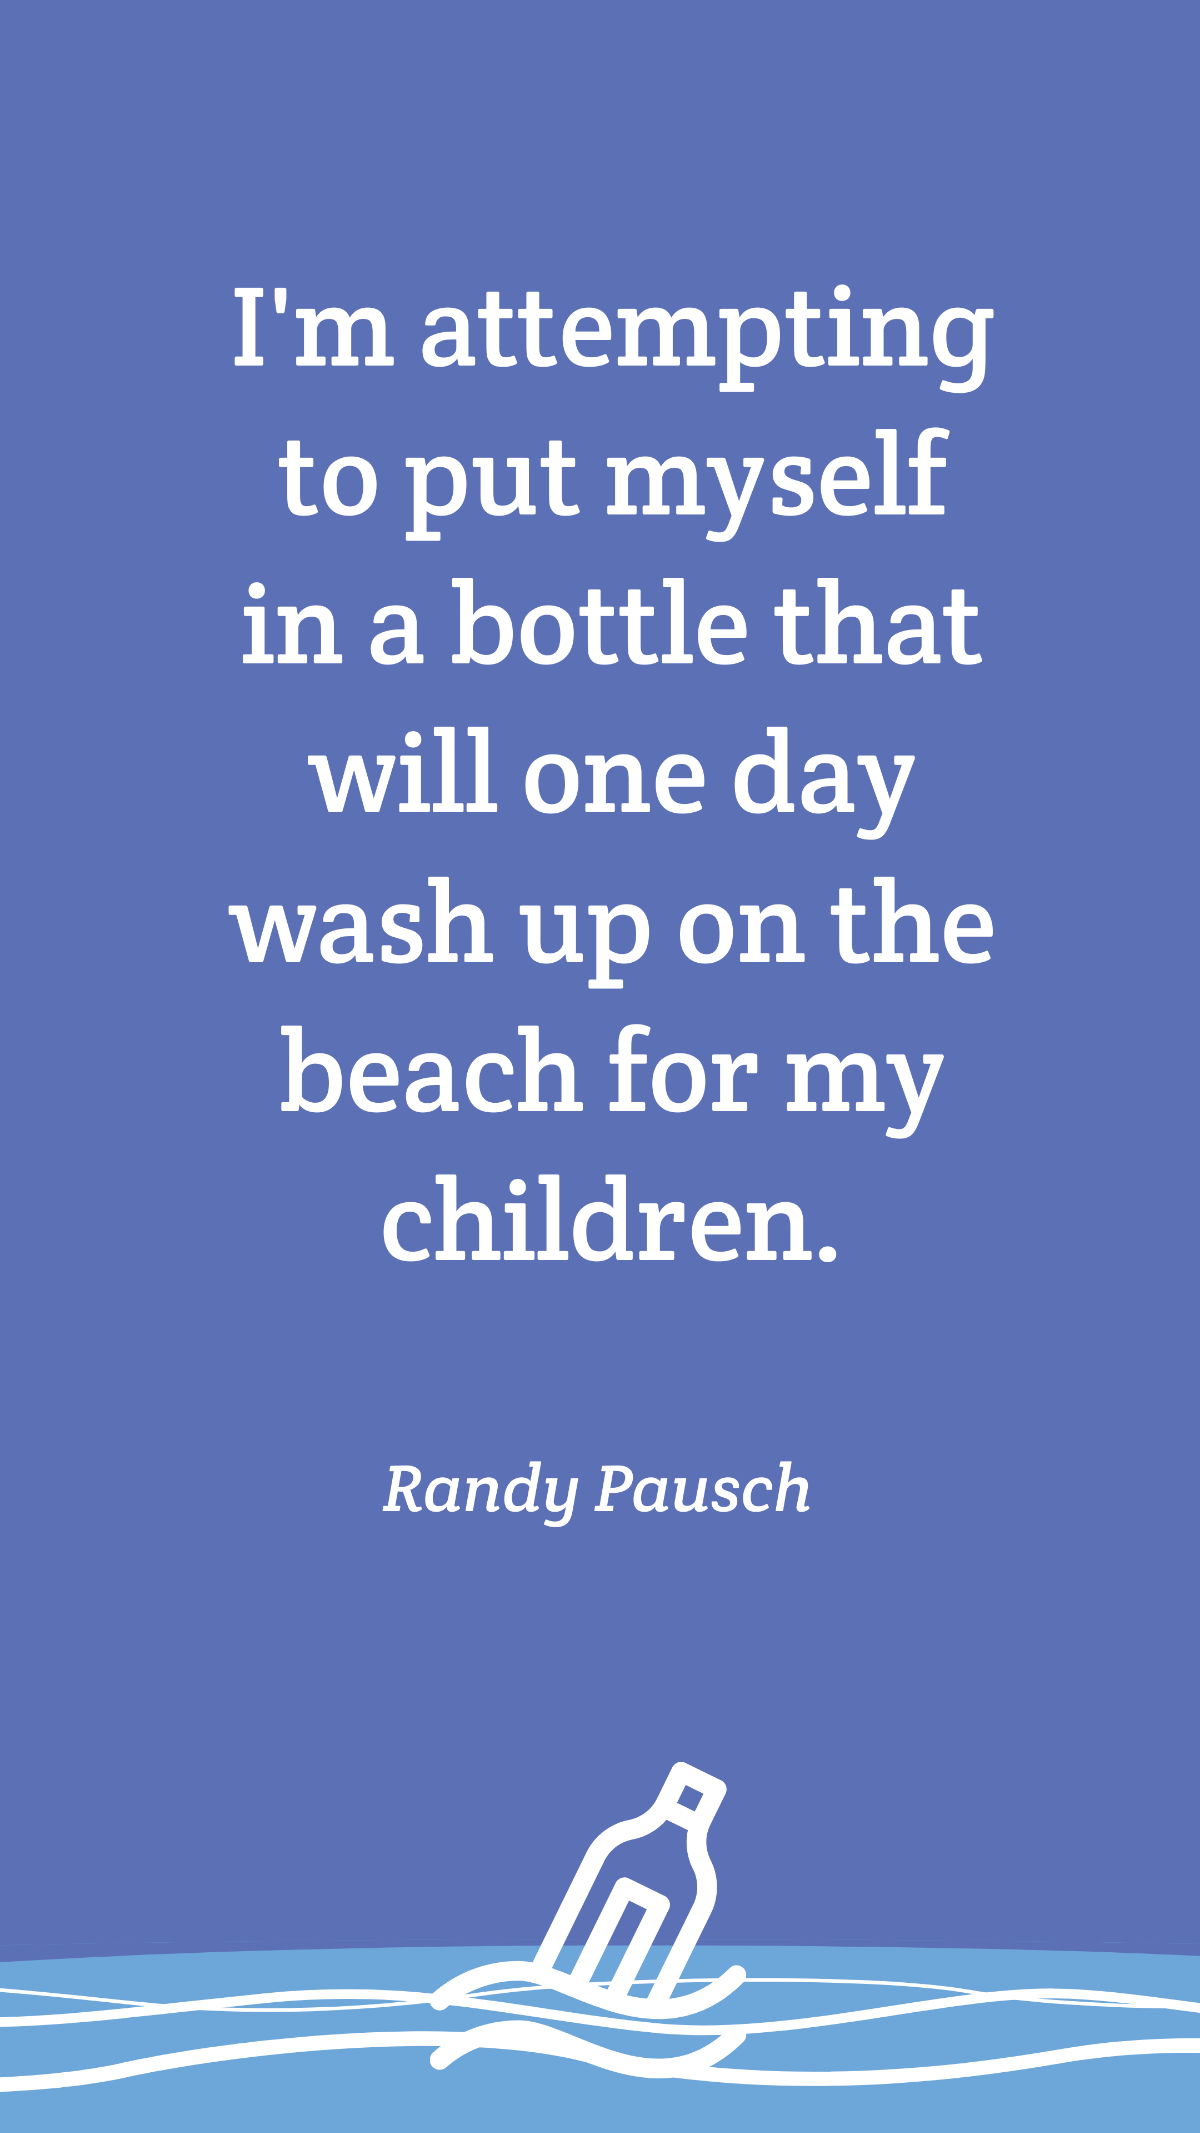 Randy Pausch - I'm attempting to put myself in a bottle that will one day wash up on the beach for my children.